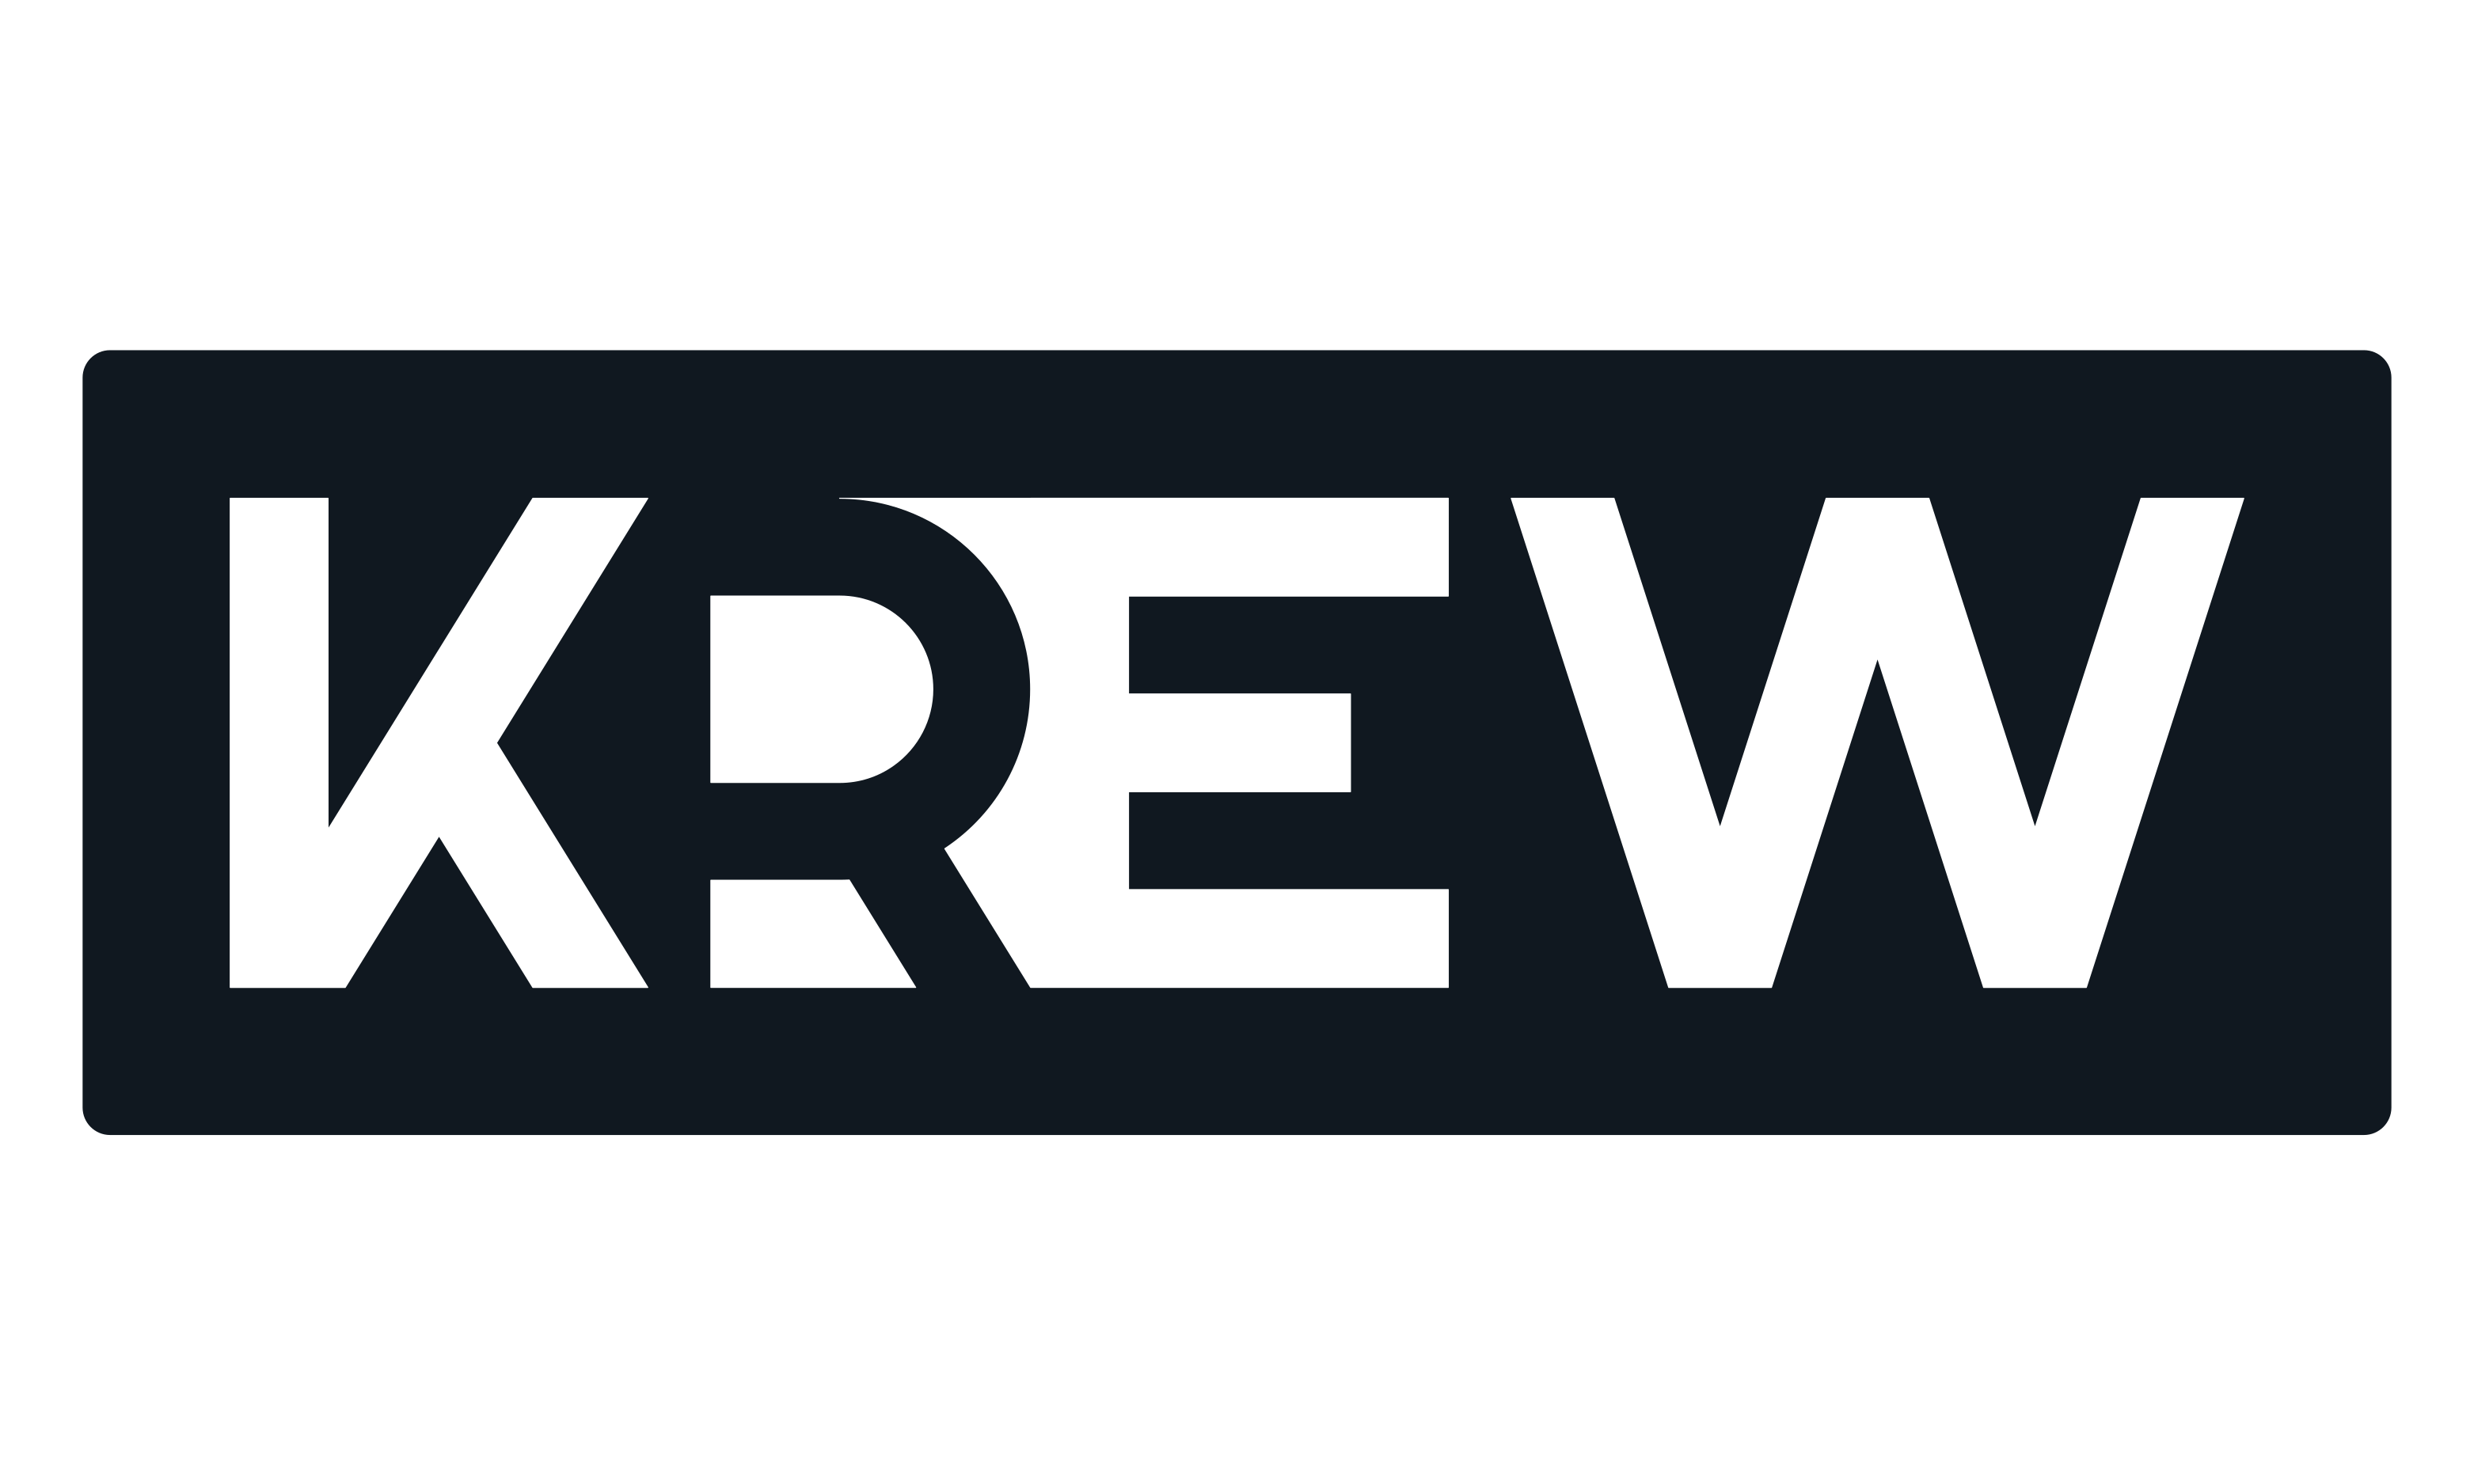 Join the Krew